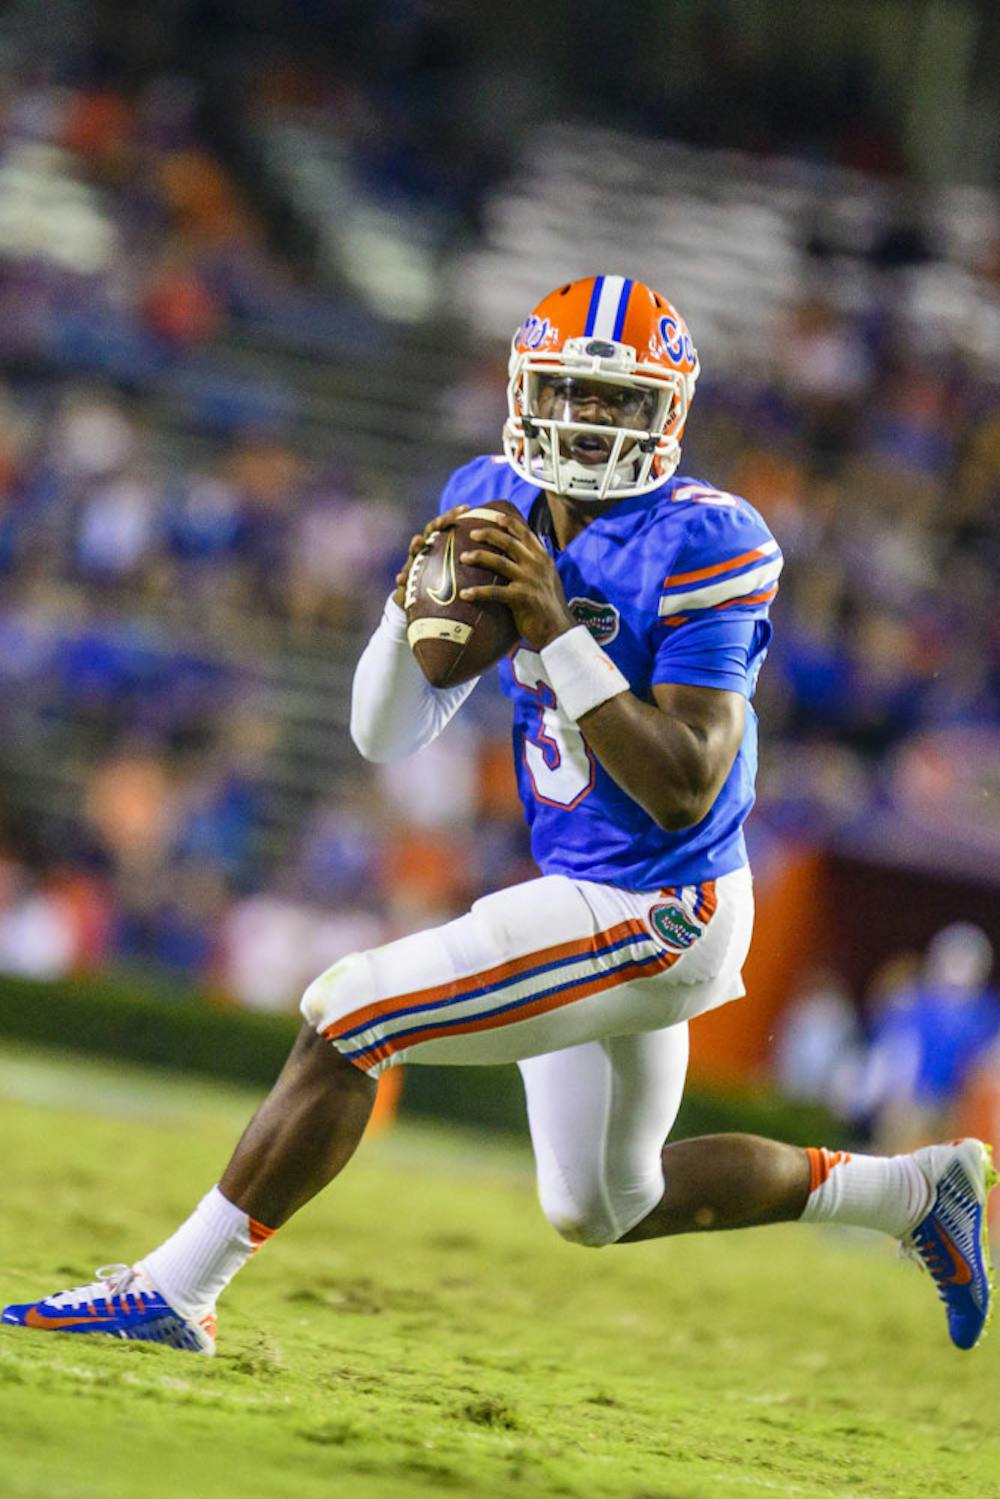 <p>Treon Harris looks downfield for a receiver during Florida's 42-13 loss to Missouri on Oct. 18 at Ben Hill Griffin Stadium.</p>